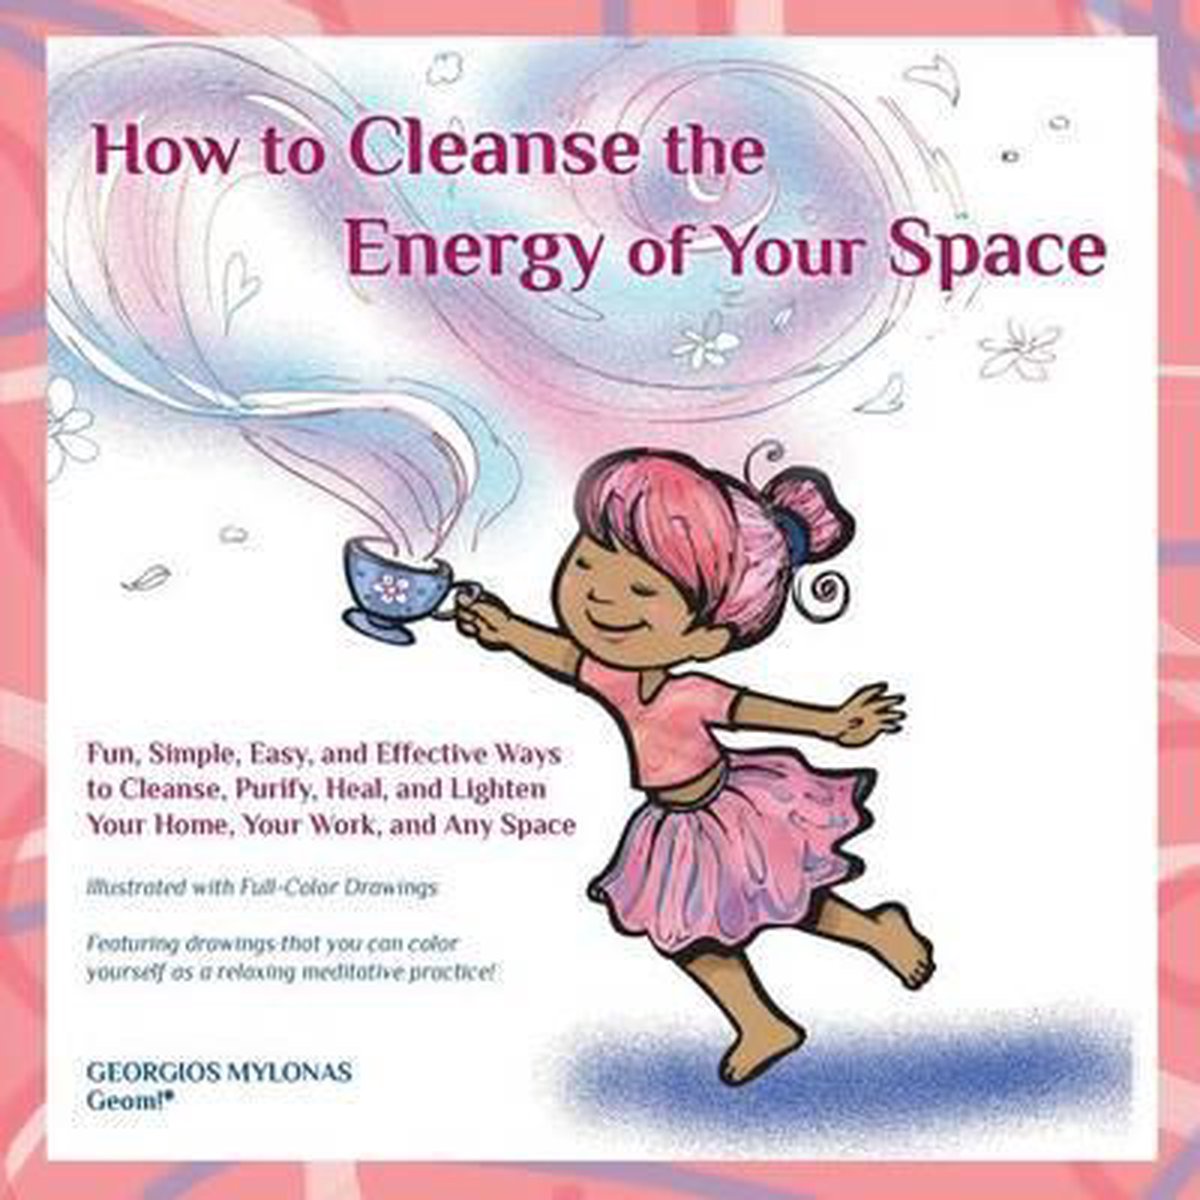 How to Cleanse the Energy of your Space